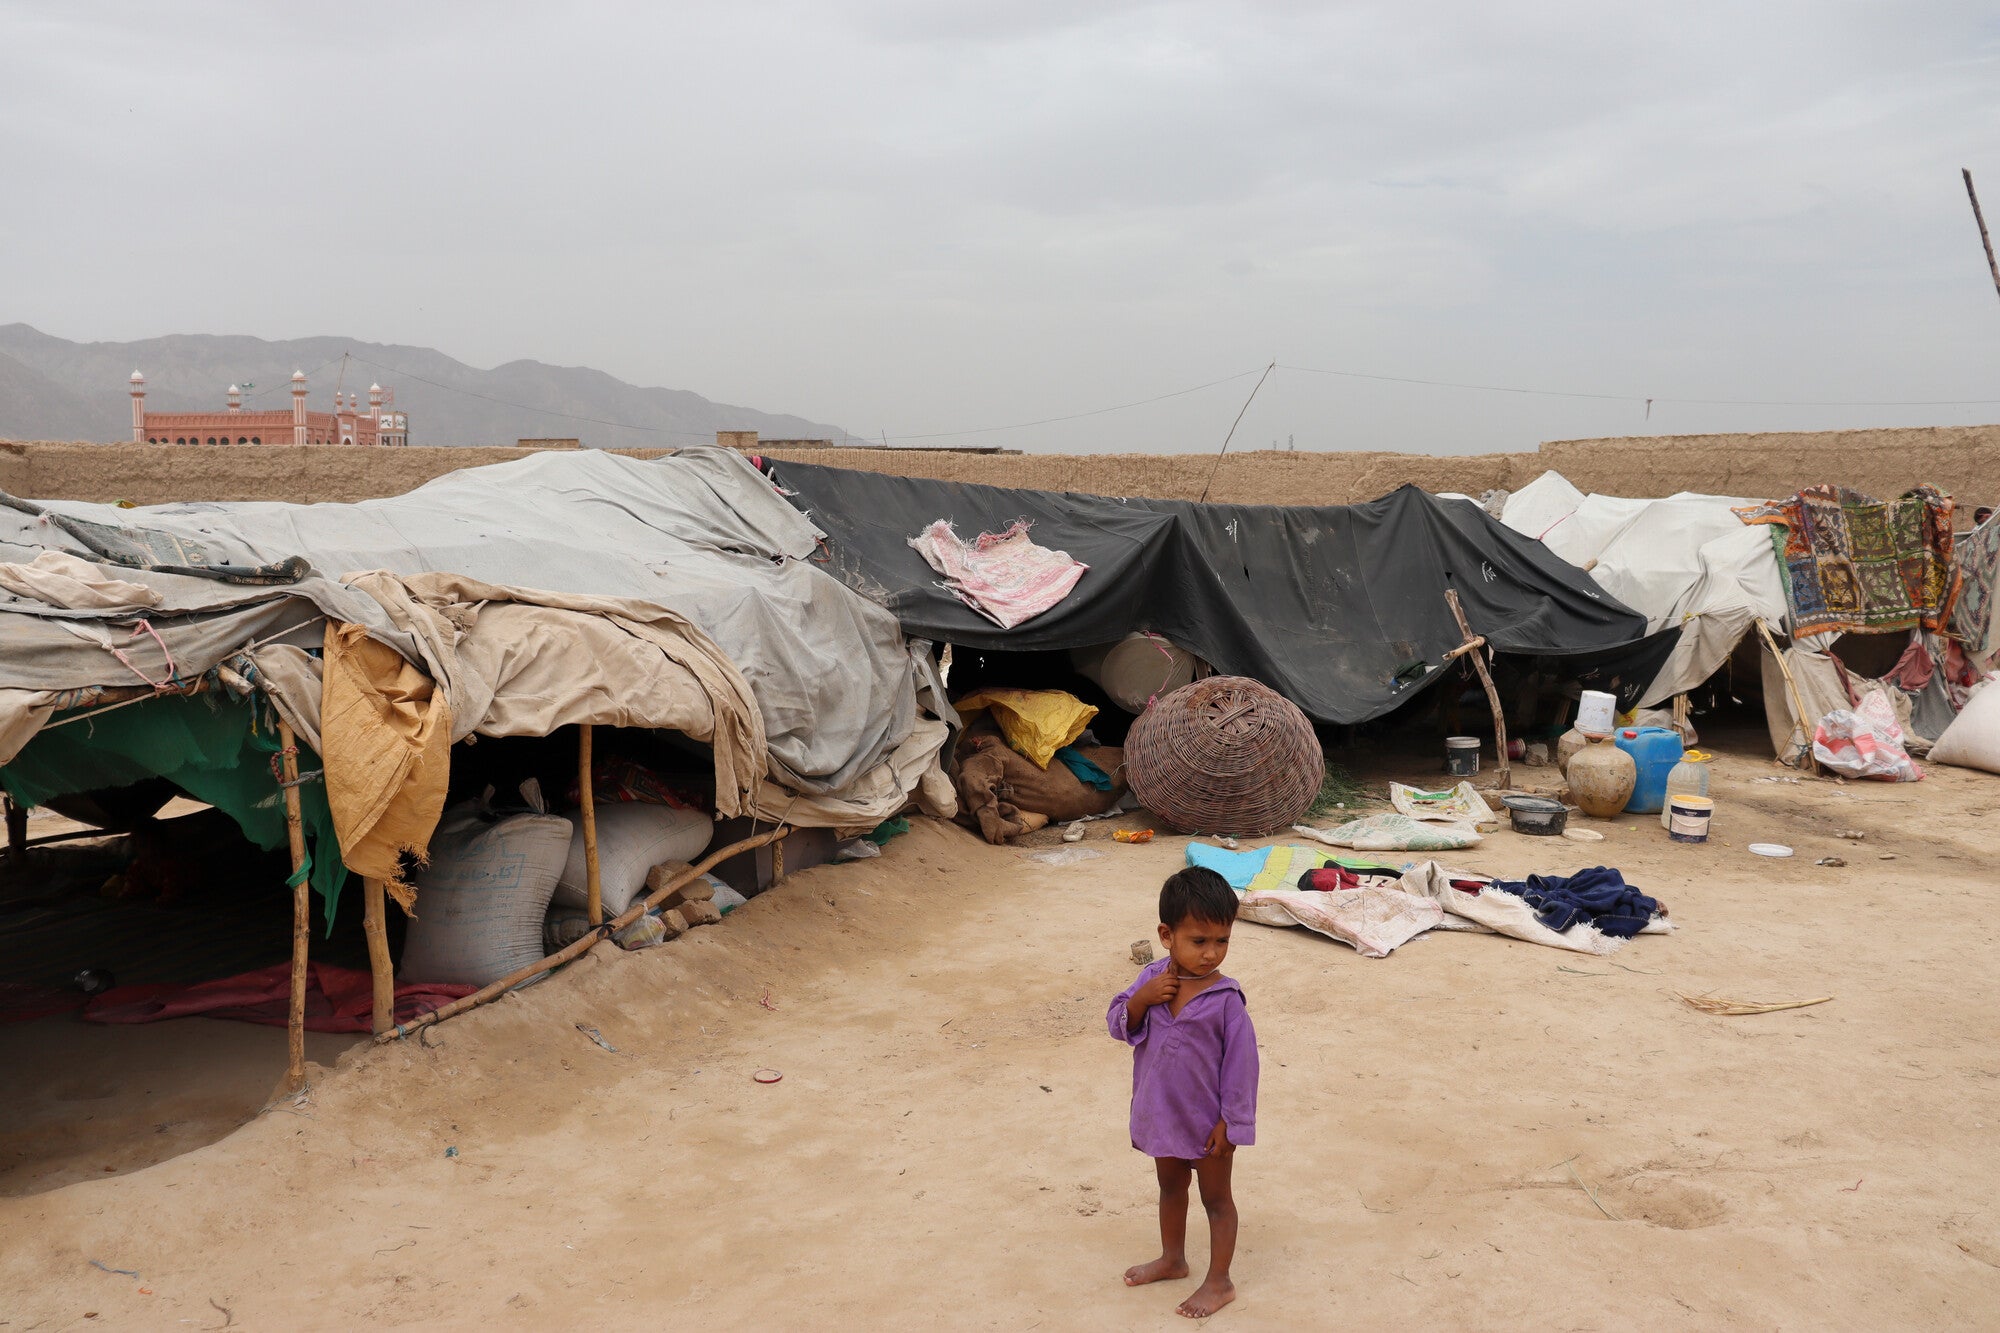 A child in front of a temporary shelter